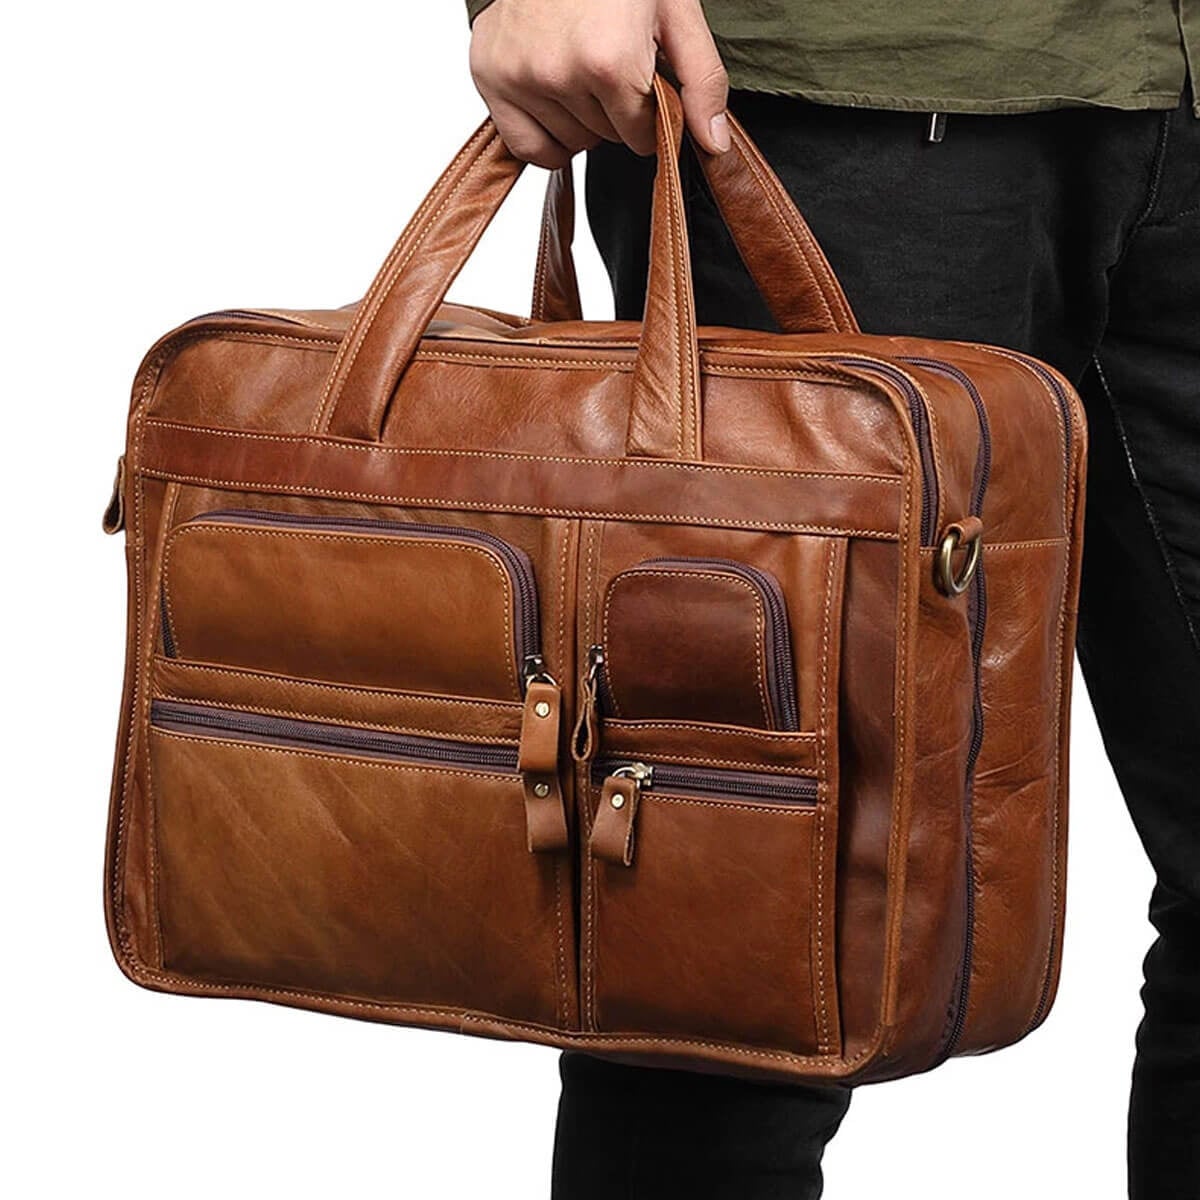 Business Messenger Bag Genuine Leather Large Capacity Briefcase